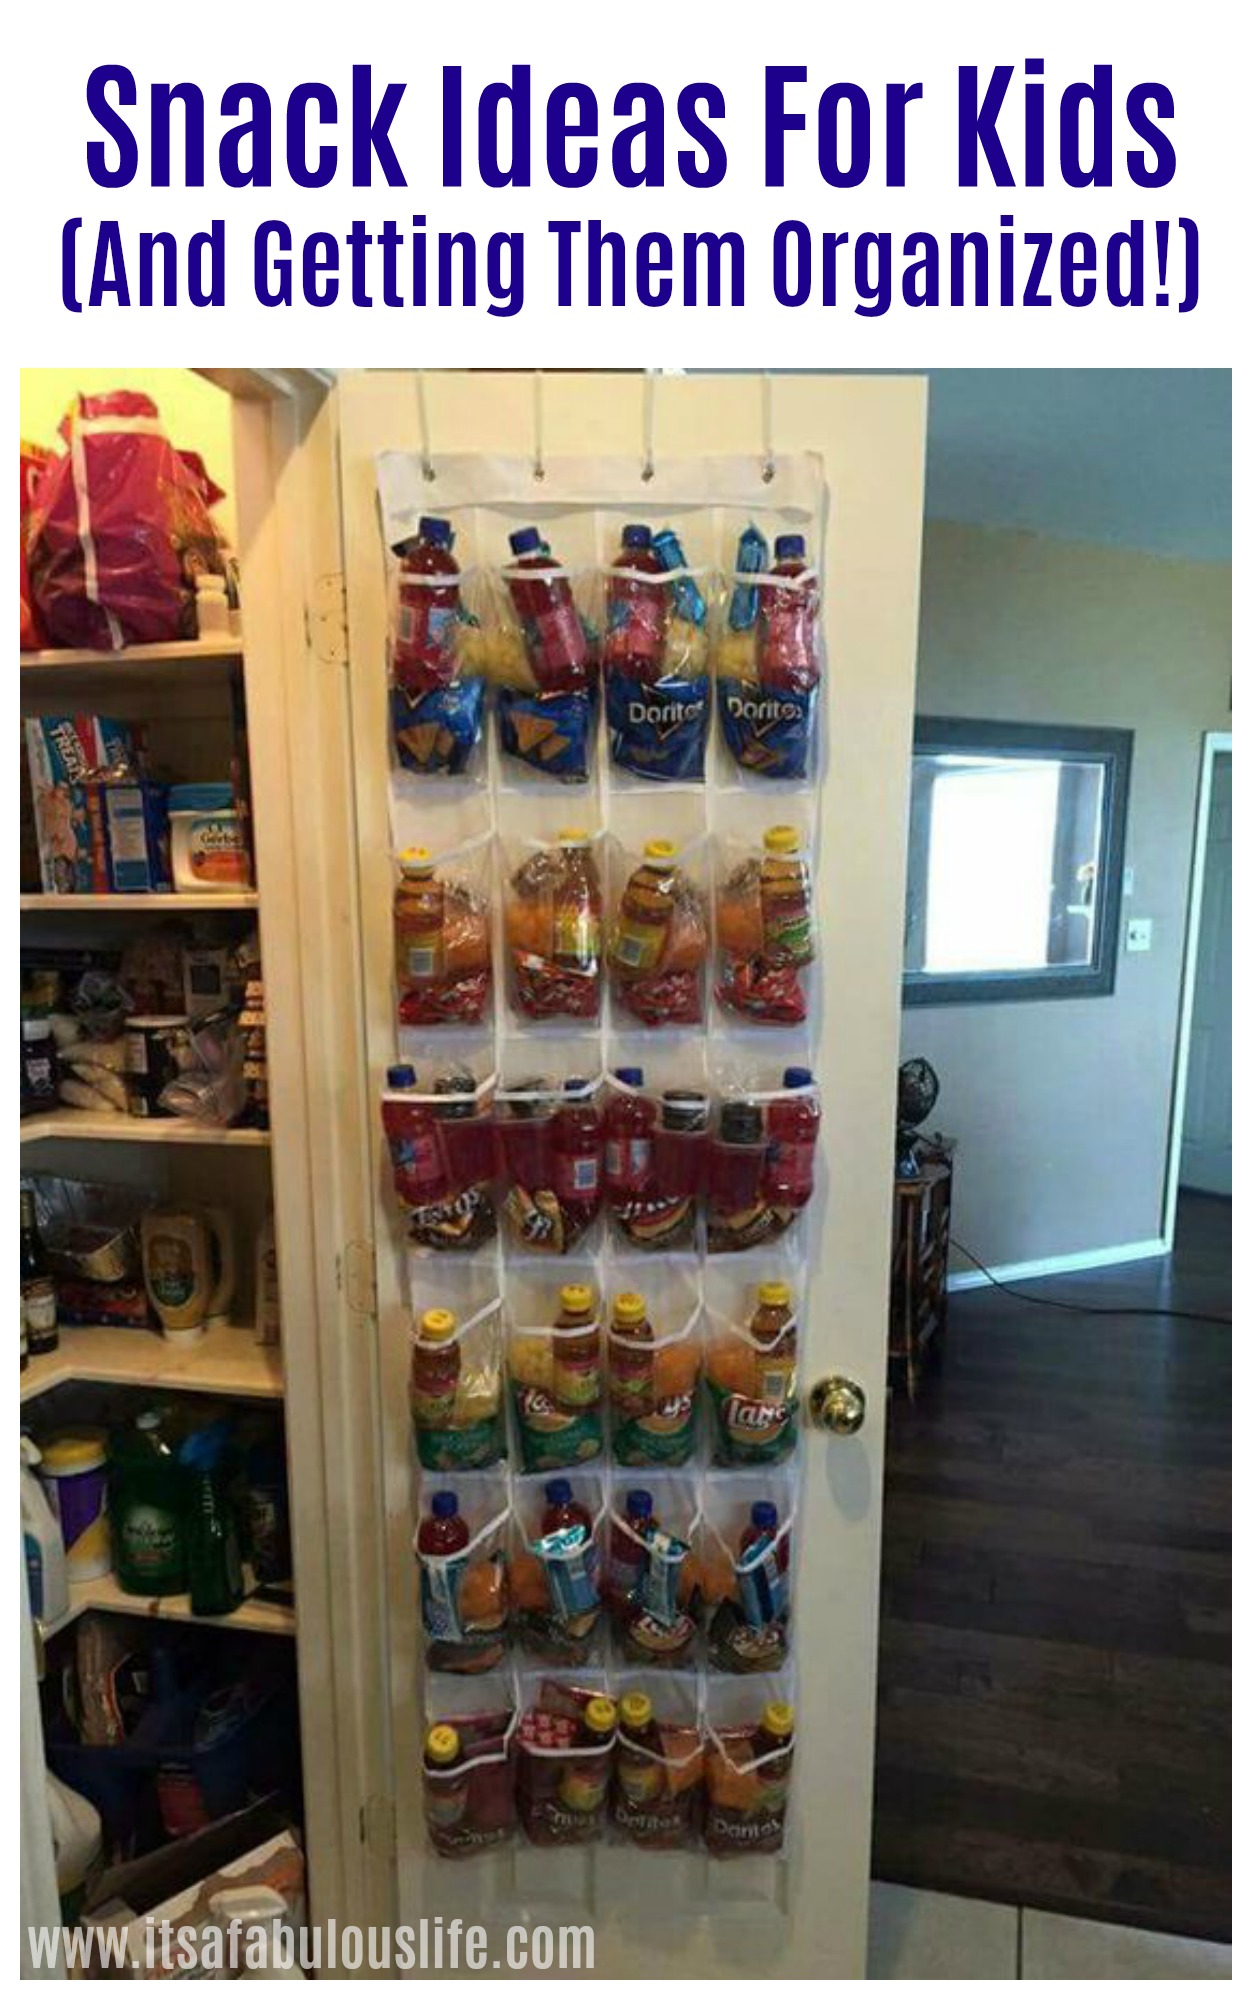 Snack Ideas For Kids And Getting Them Organized